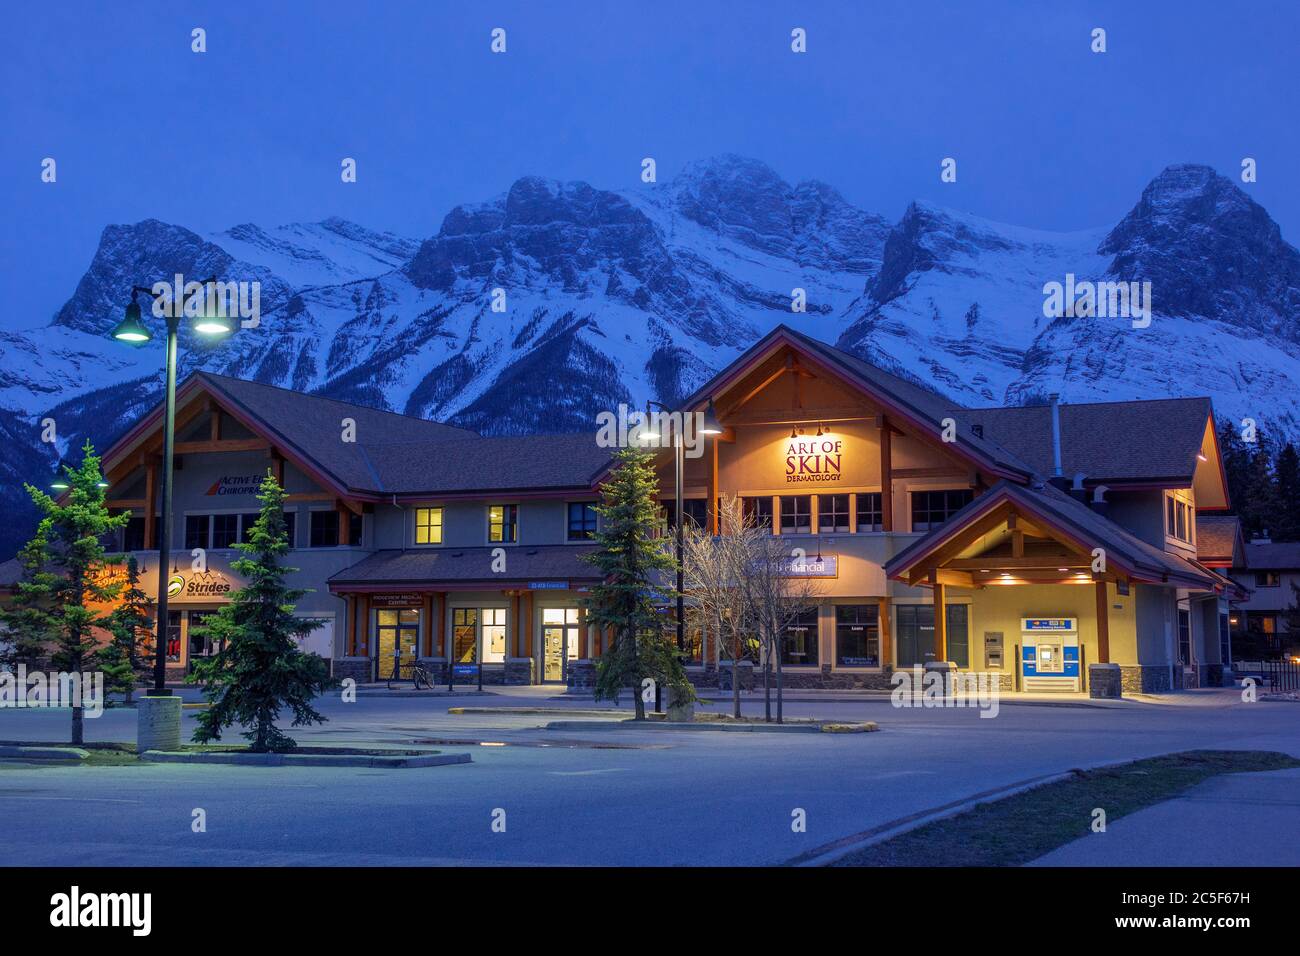 Shops In Canmore On Railway Avenue Alberta Canada At Night With The Snow Covered Mount Rundle Rocky Mountains In The Background Stock Photo